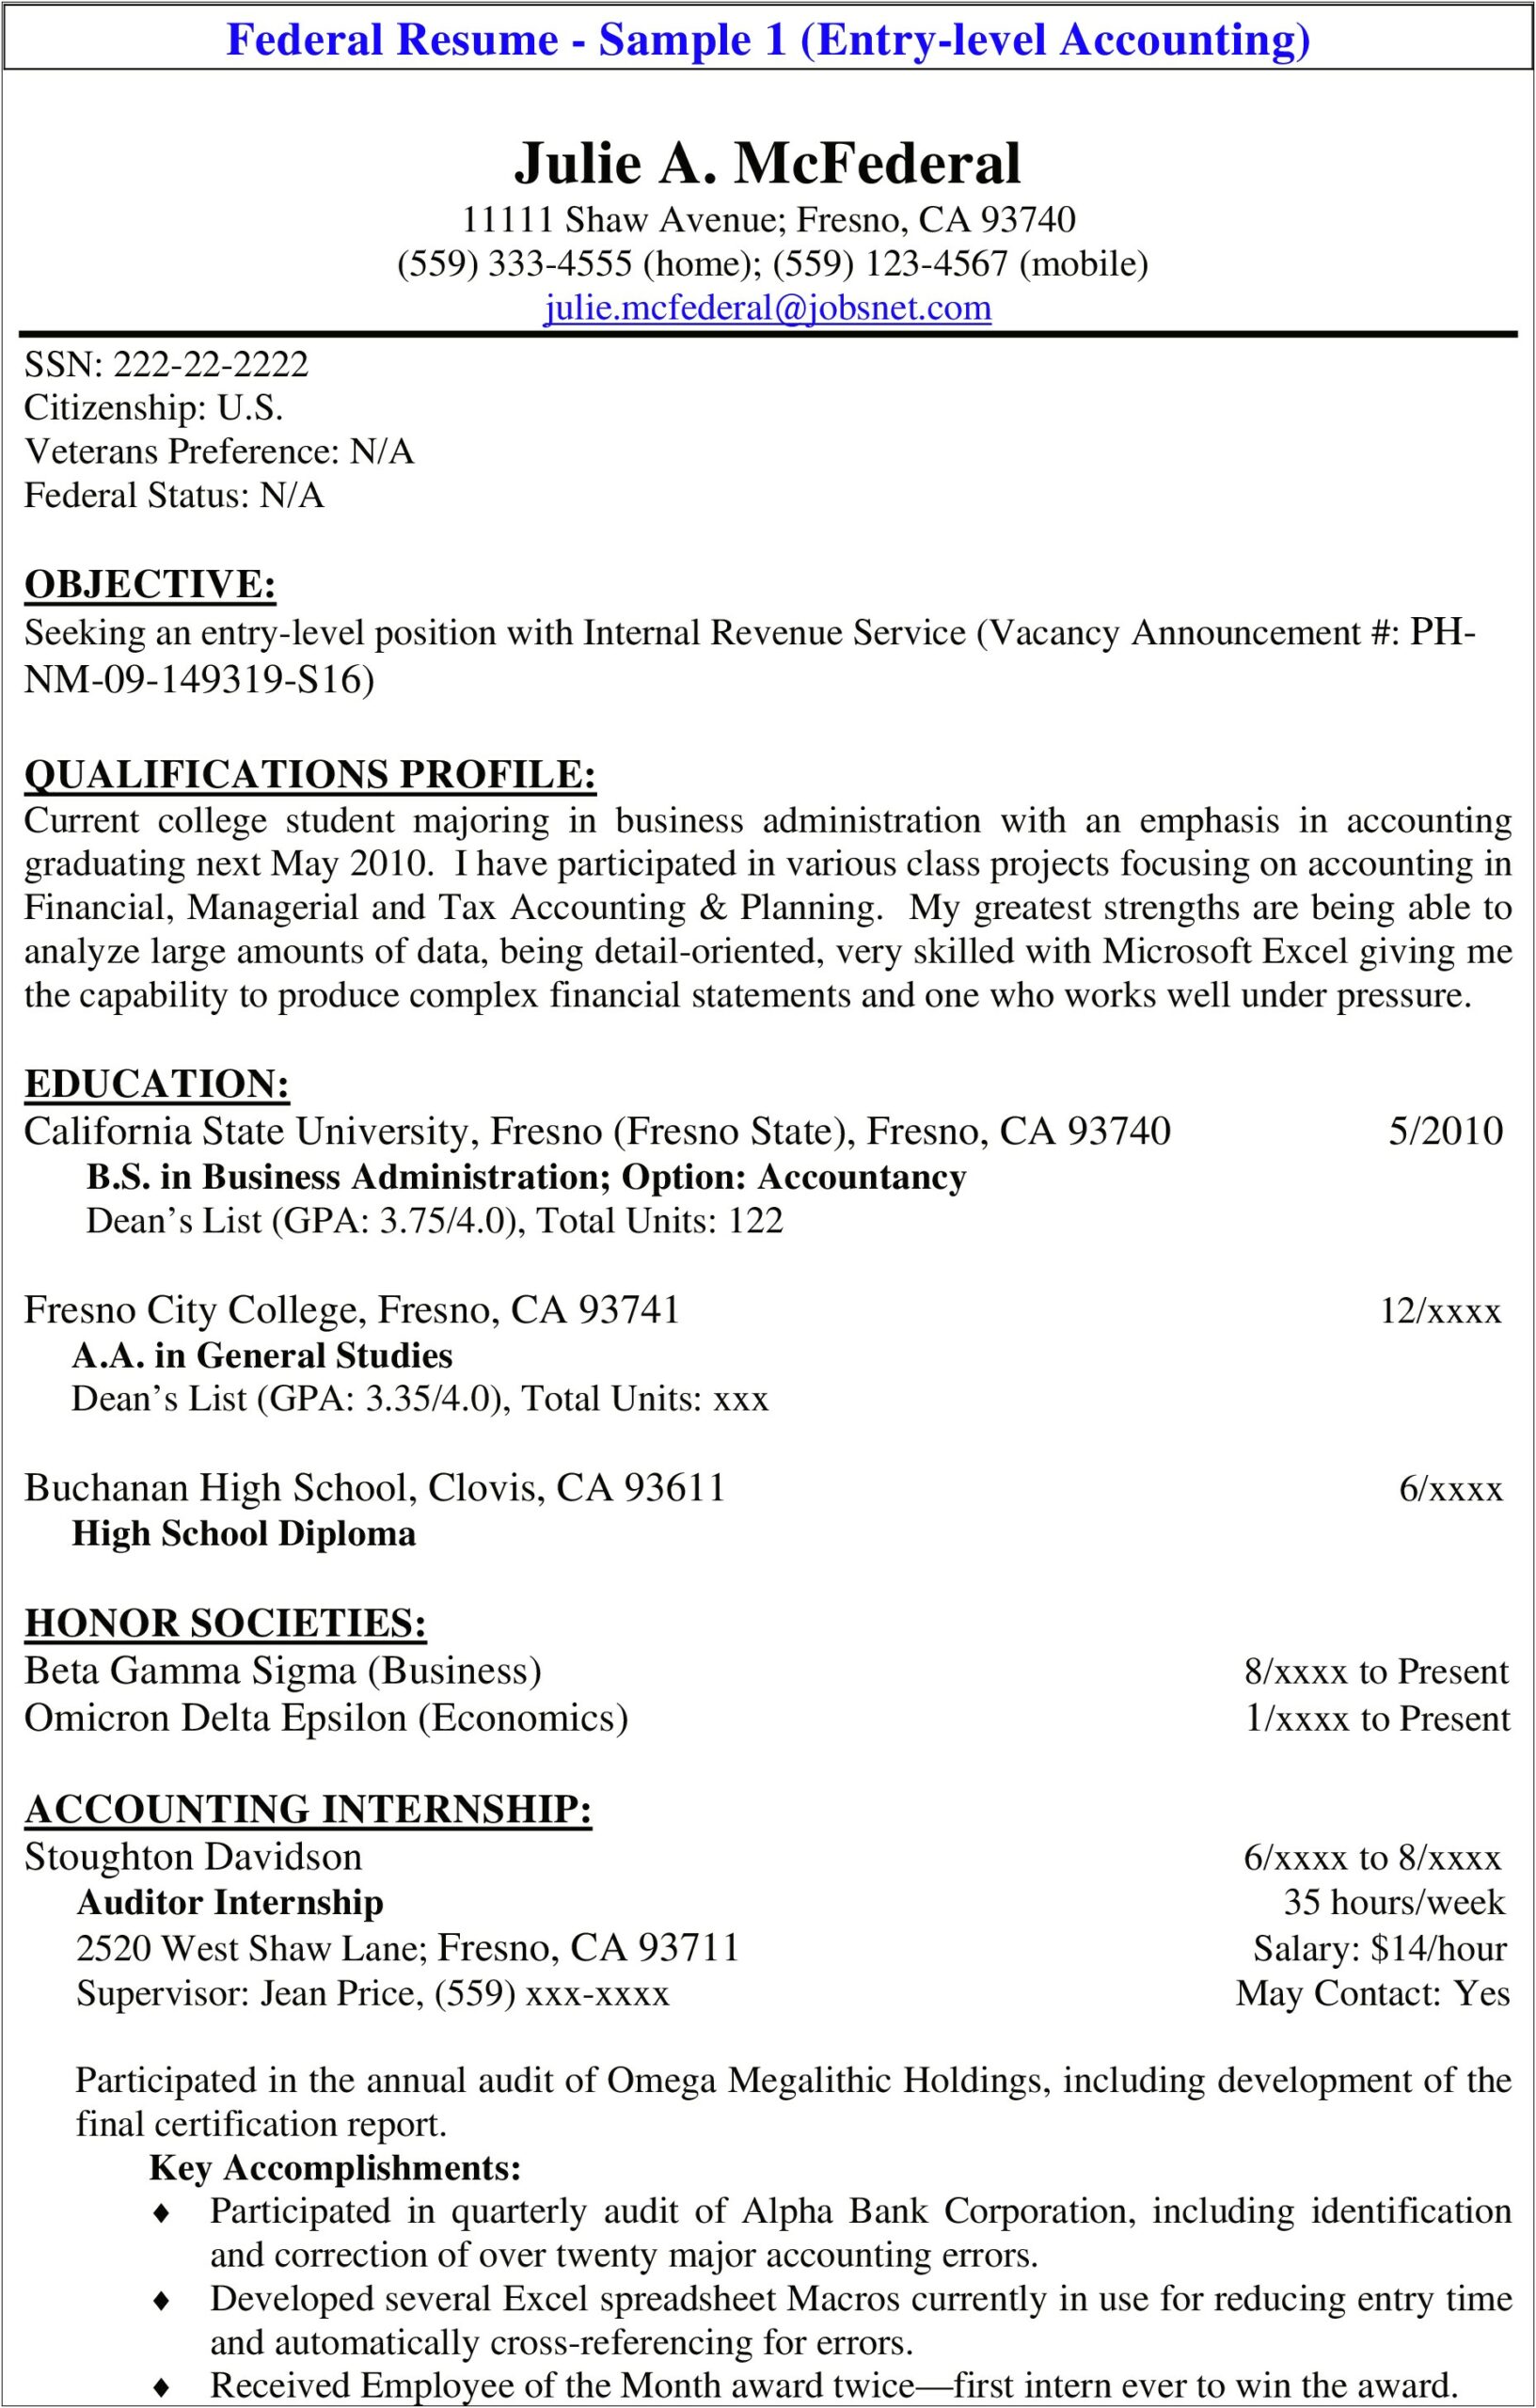 Resume Examples For Accounting Interns